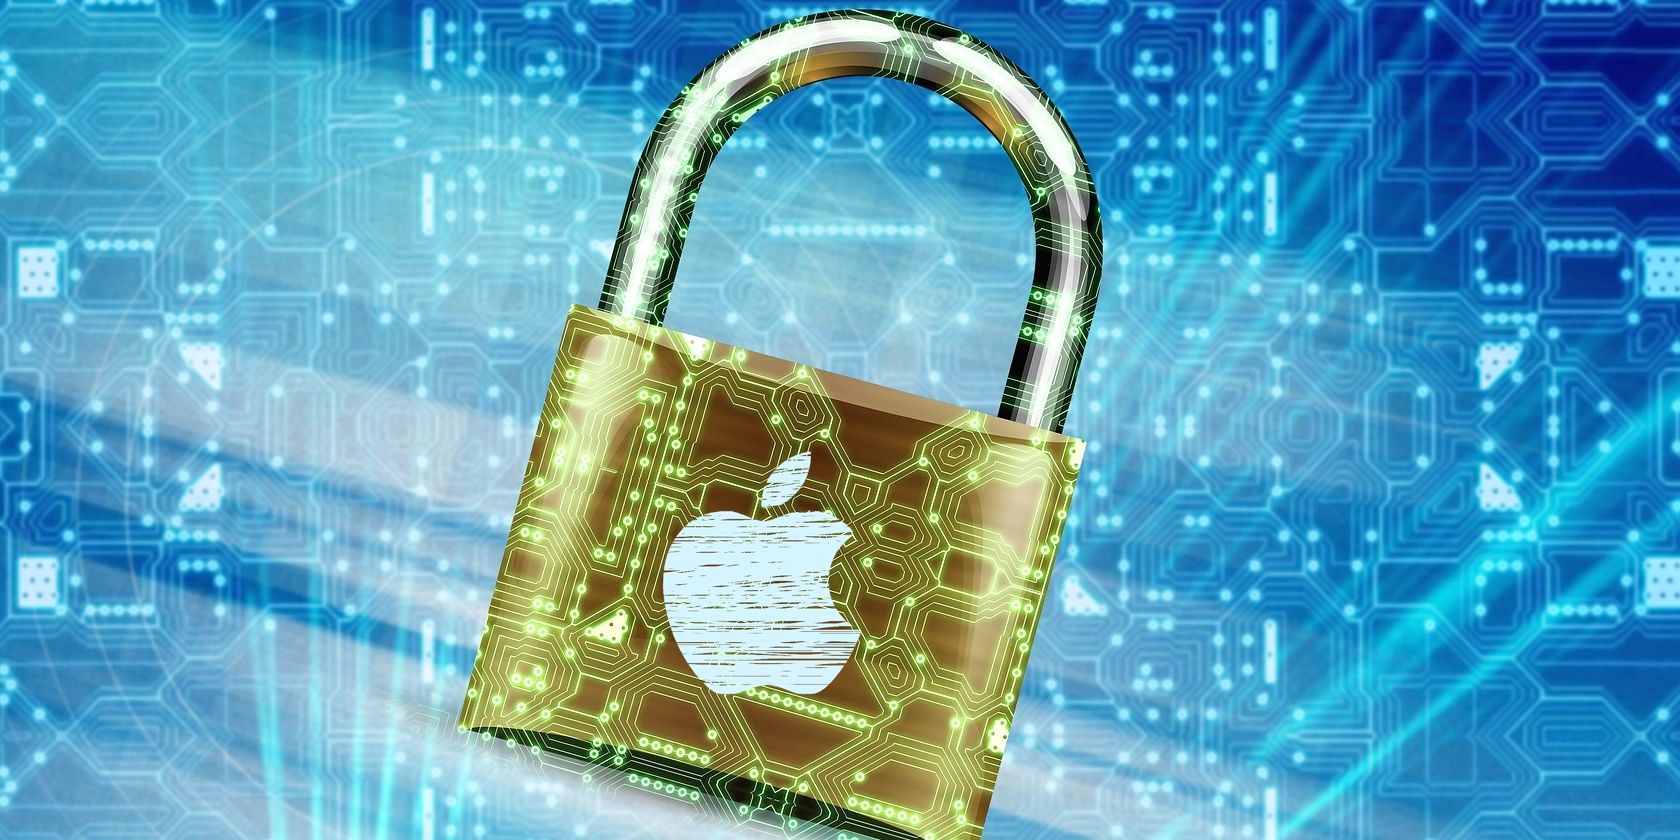 Cybersecurity padlock with apple logo and blue background.